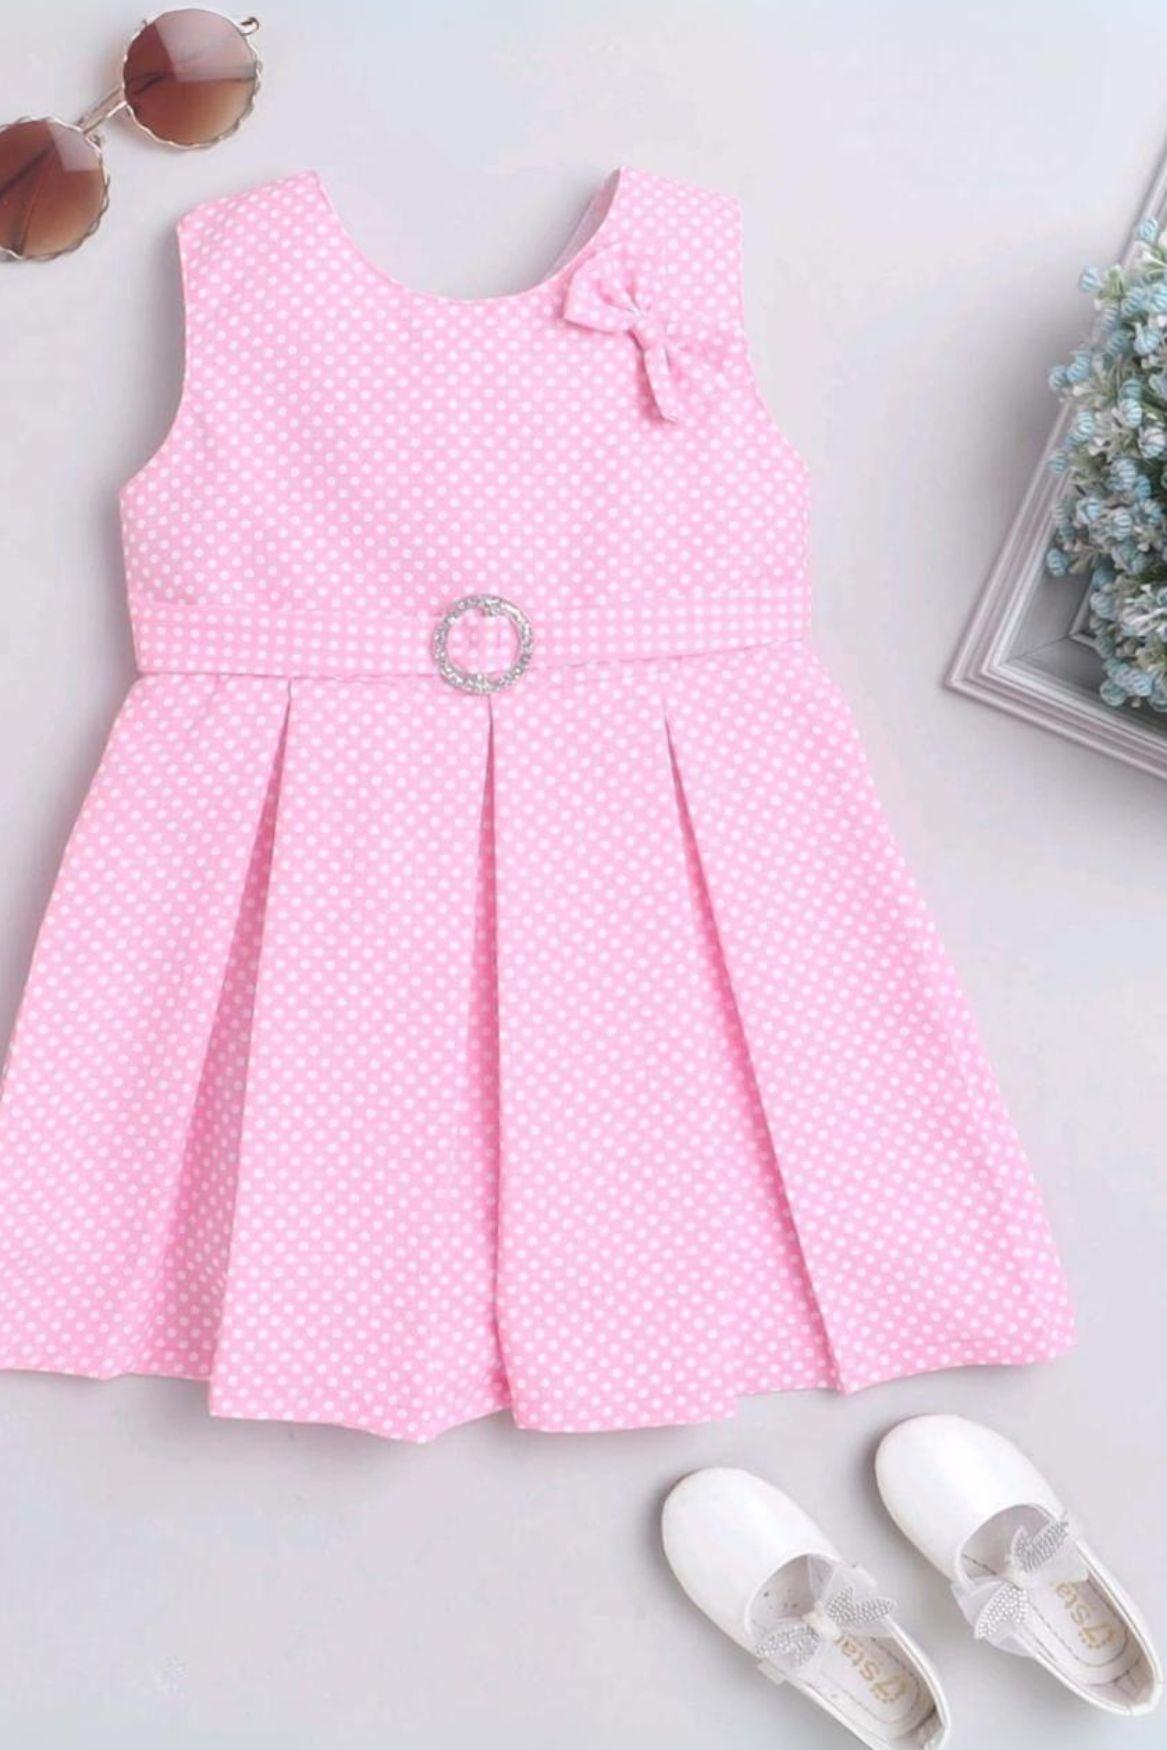 Cute Baby Pink Frock With Bow Embellishment For Girls - Lagorii Kids